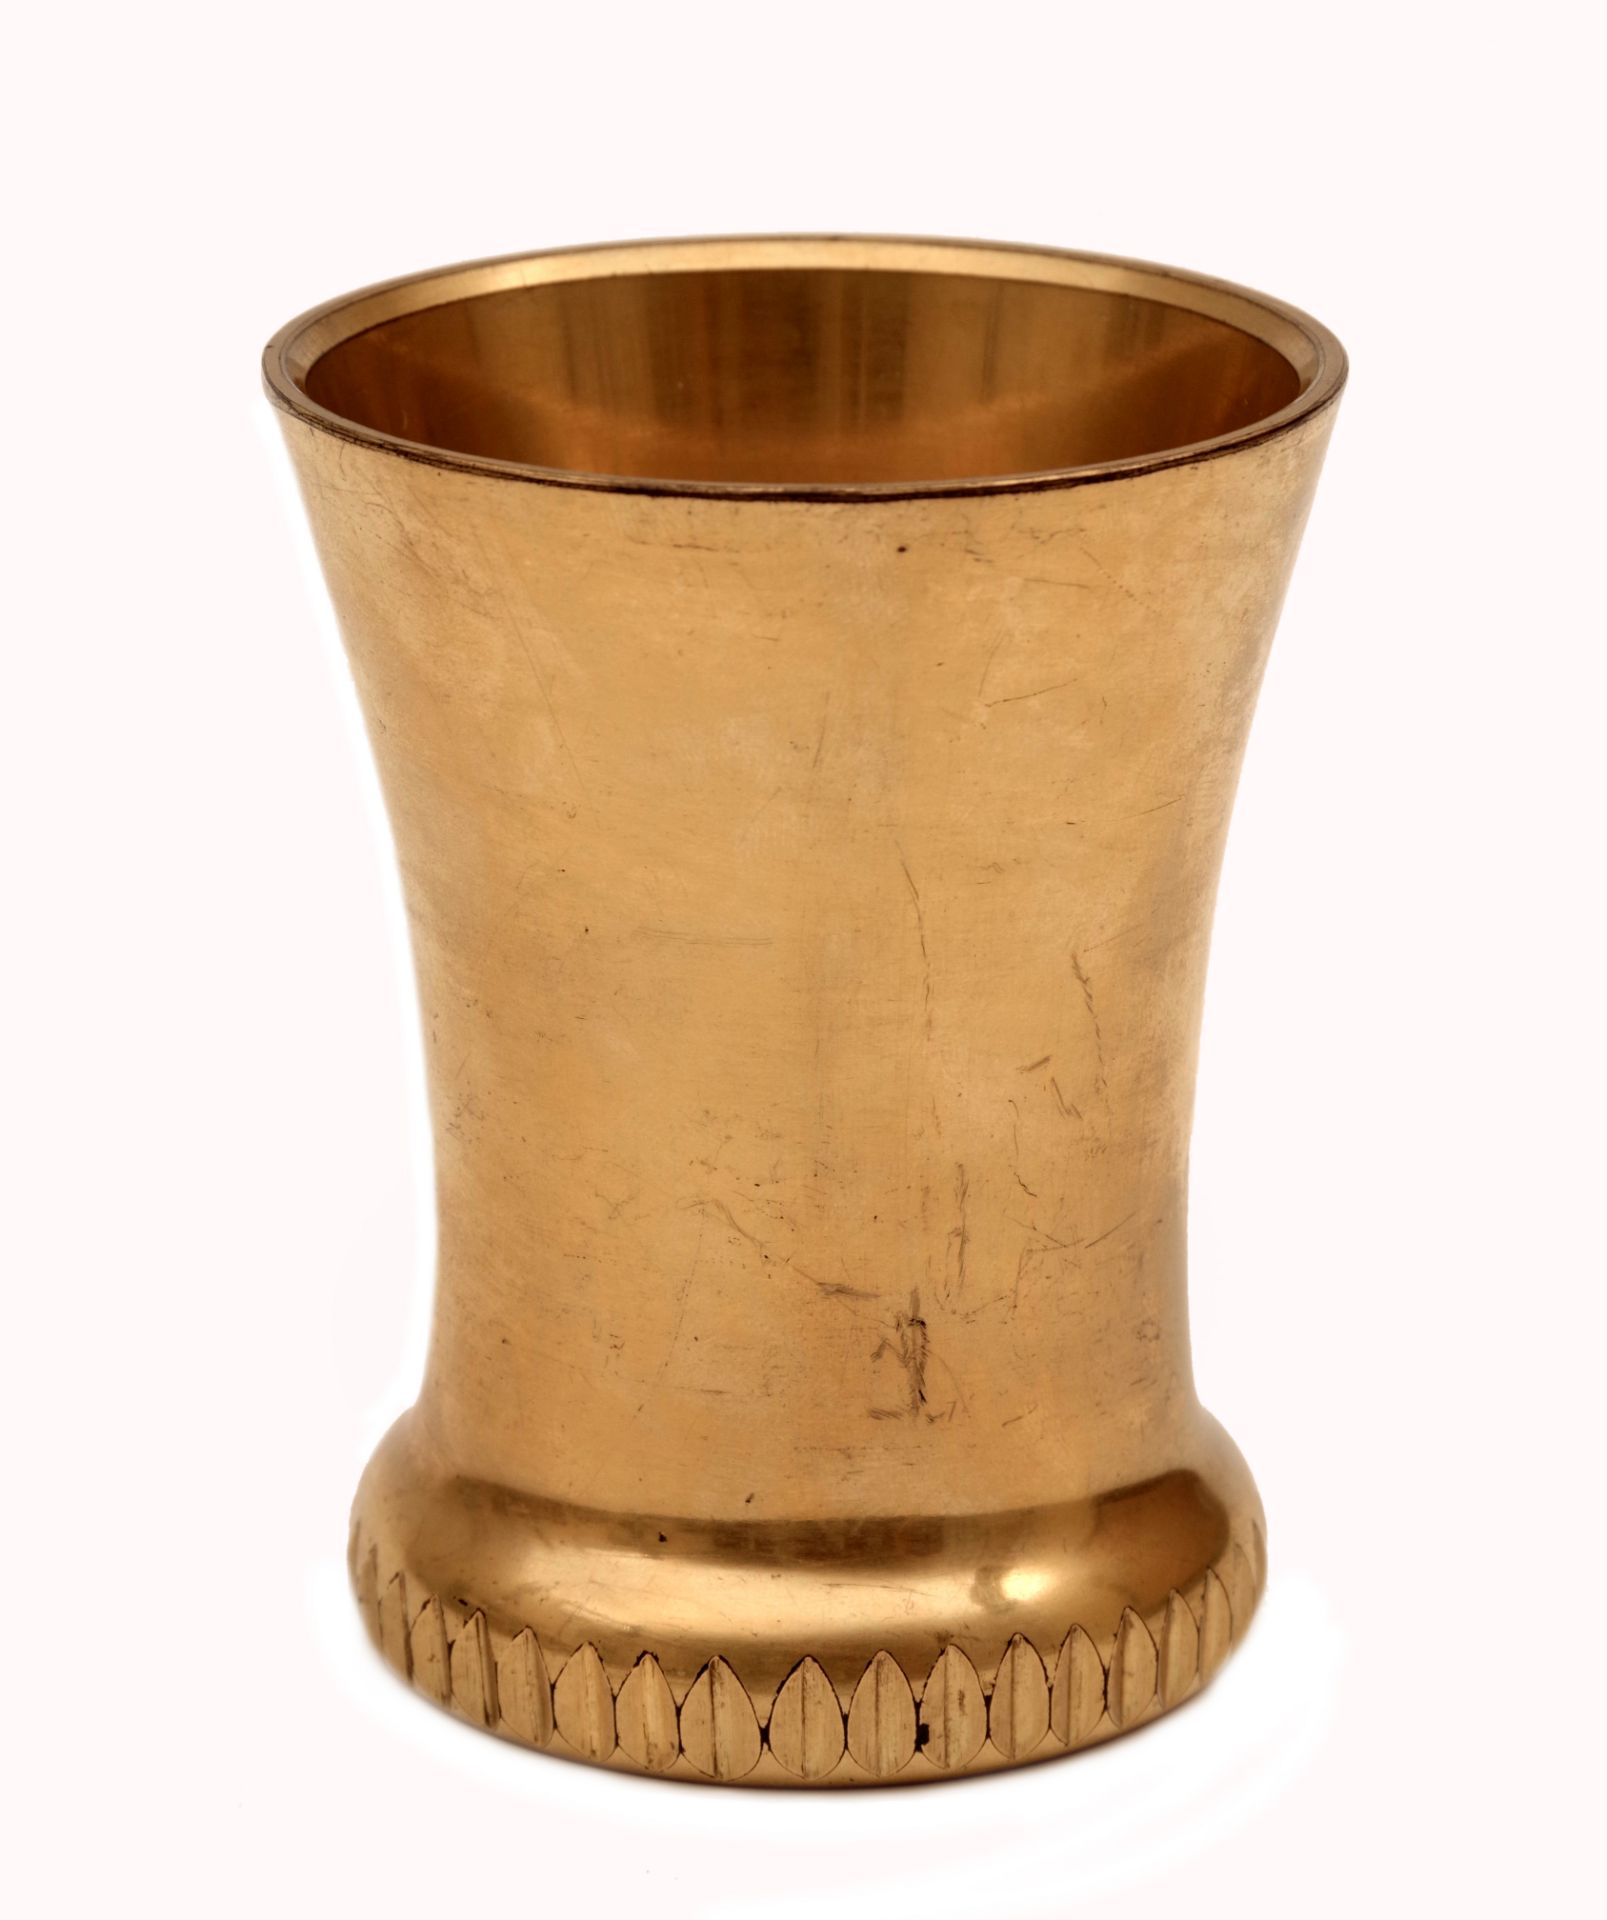 A Bell-Shaped Goblet of Ranftbecher Type